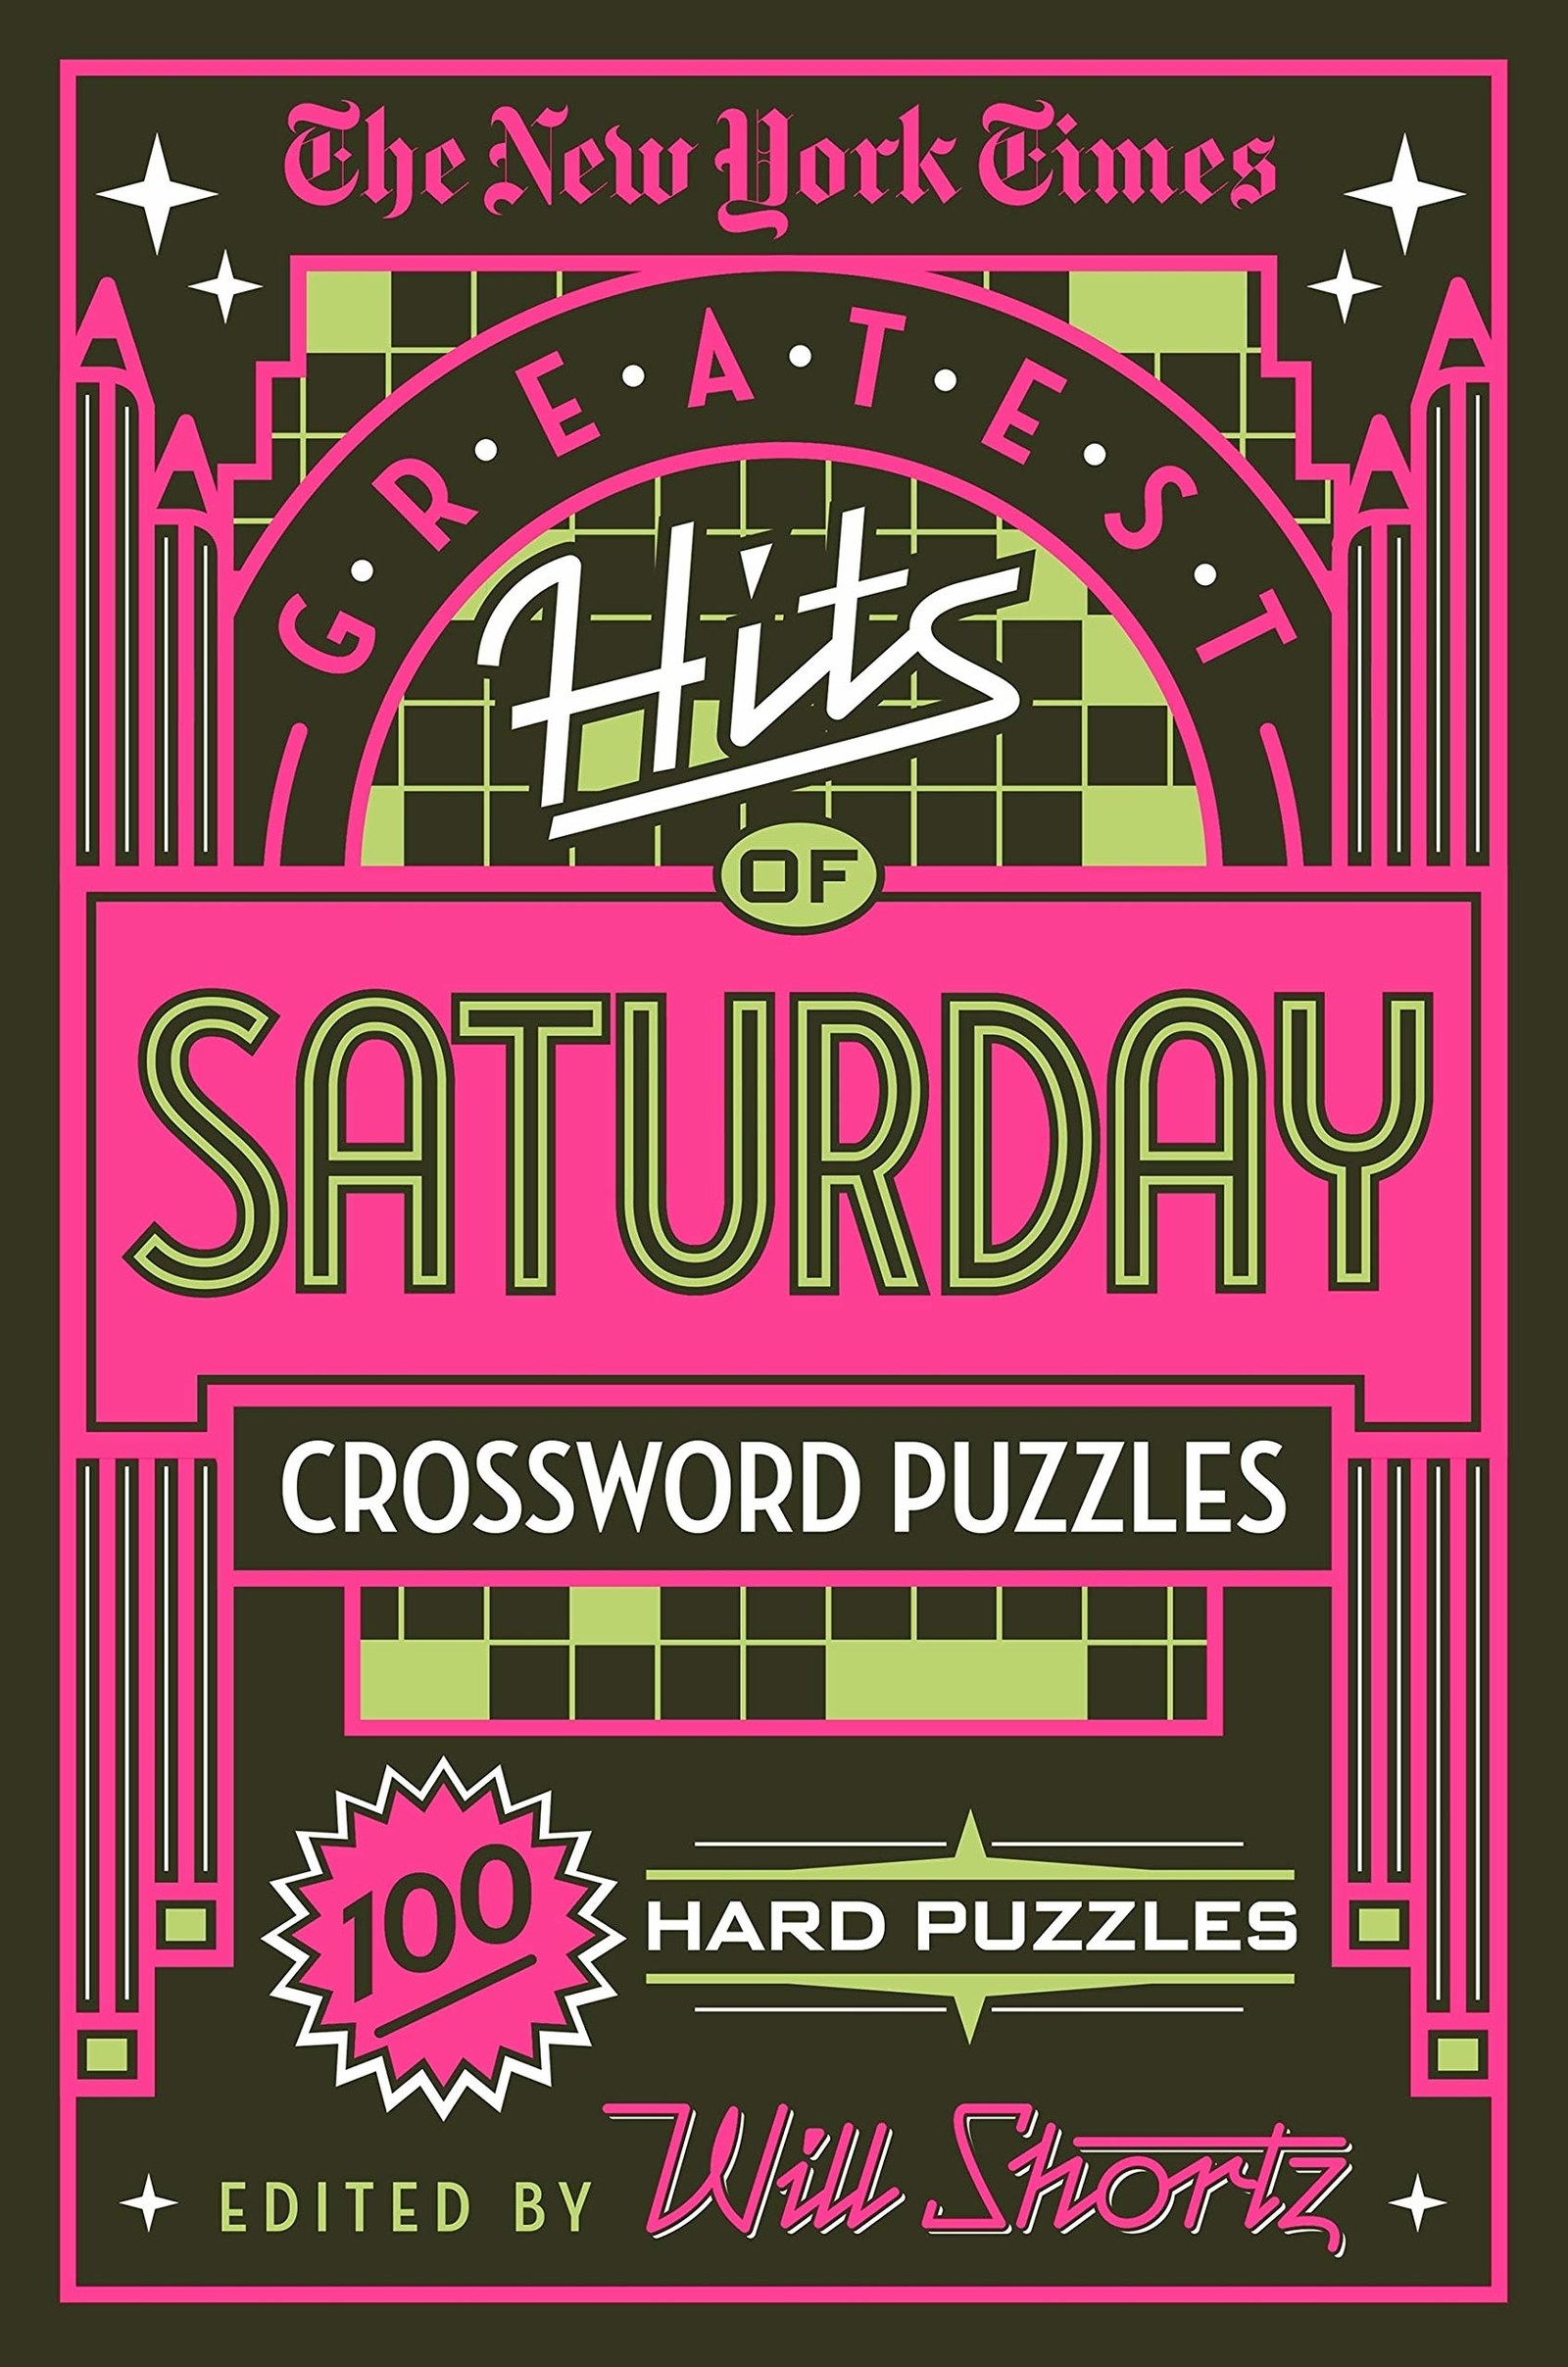 cover of The New York Times crosswords puzzle book